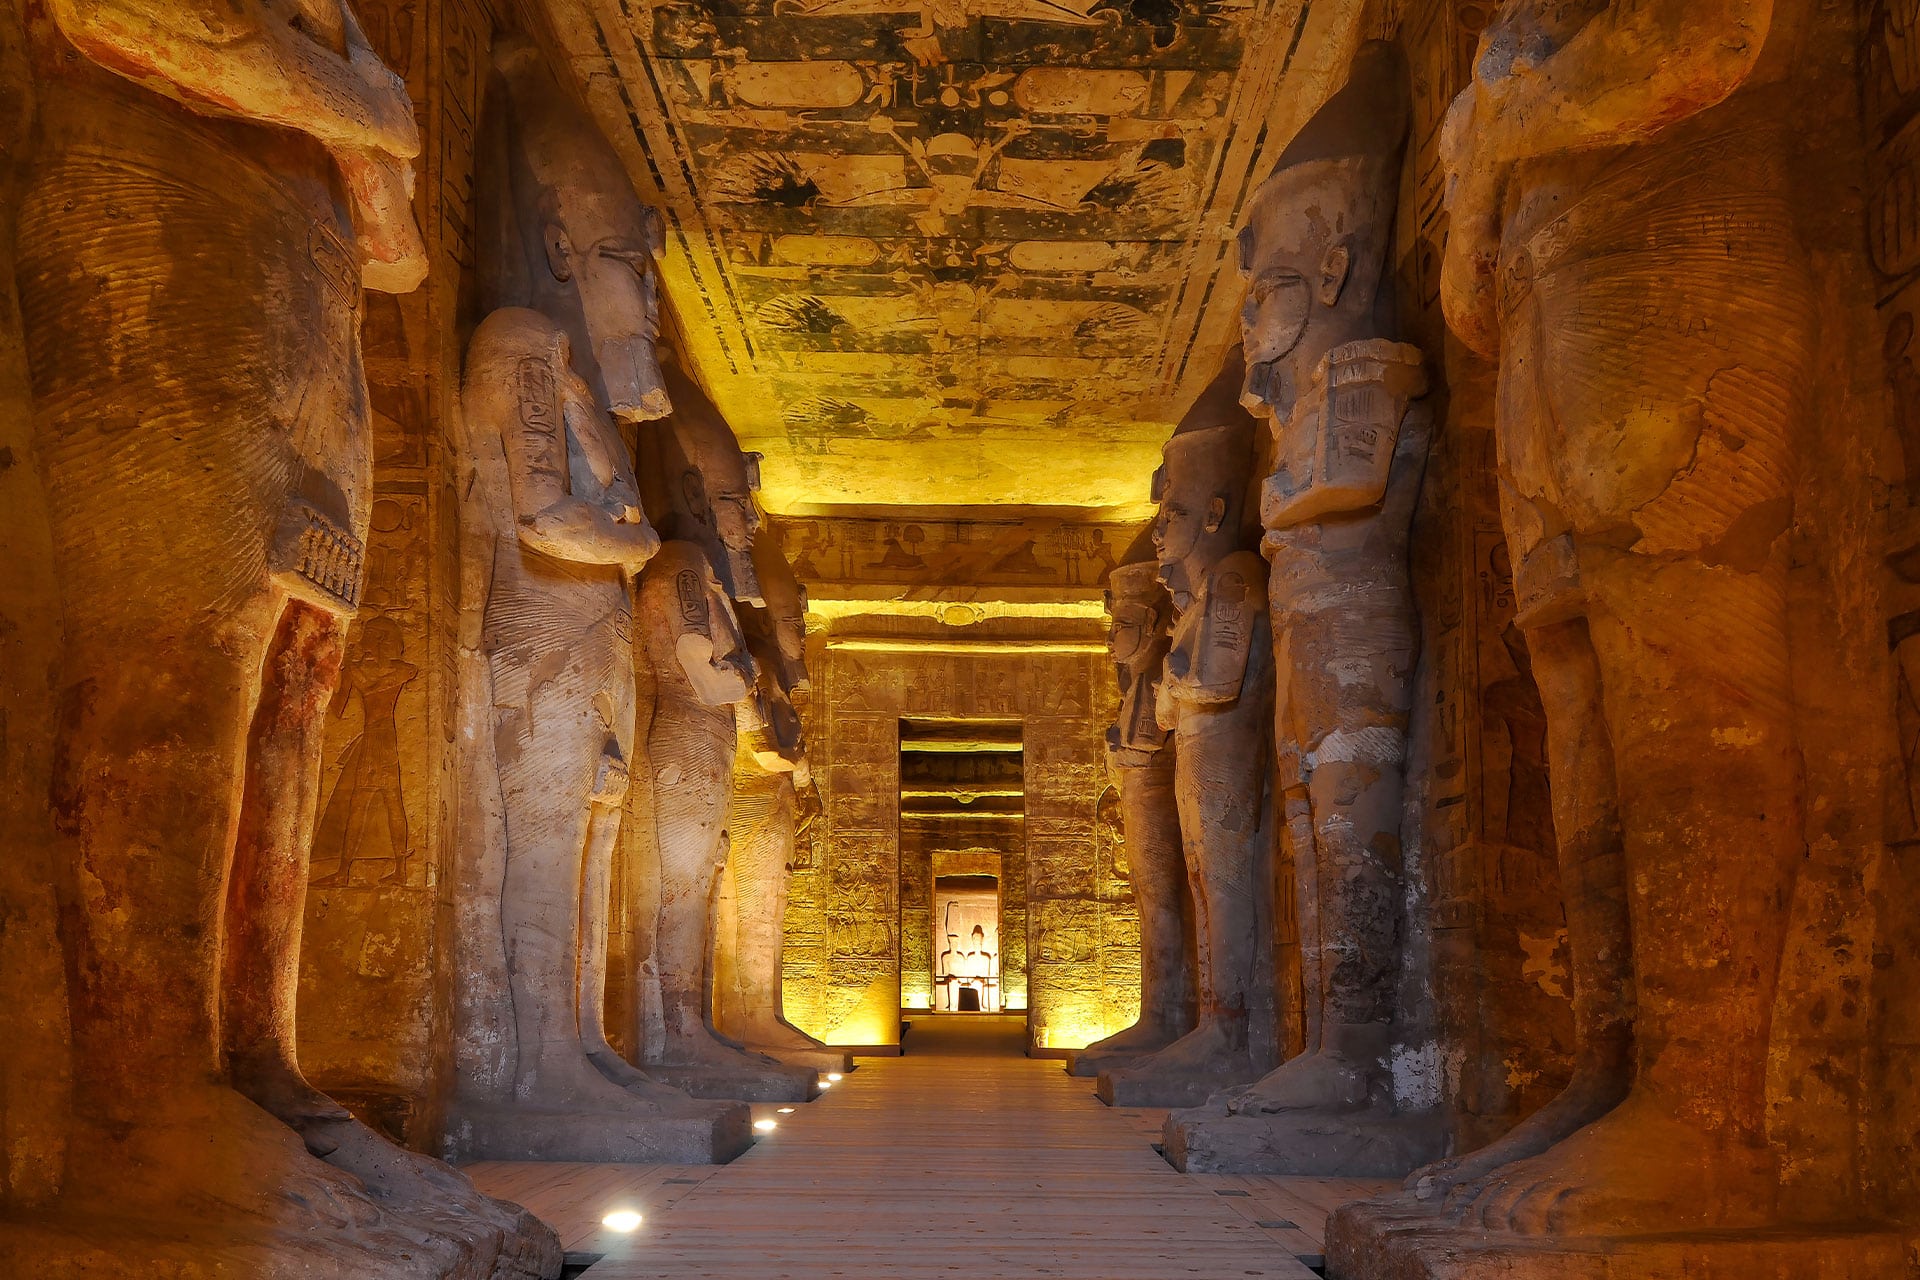 Inside the tomb of King Ramses II at Abu Simbel in Egypt.